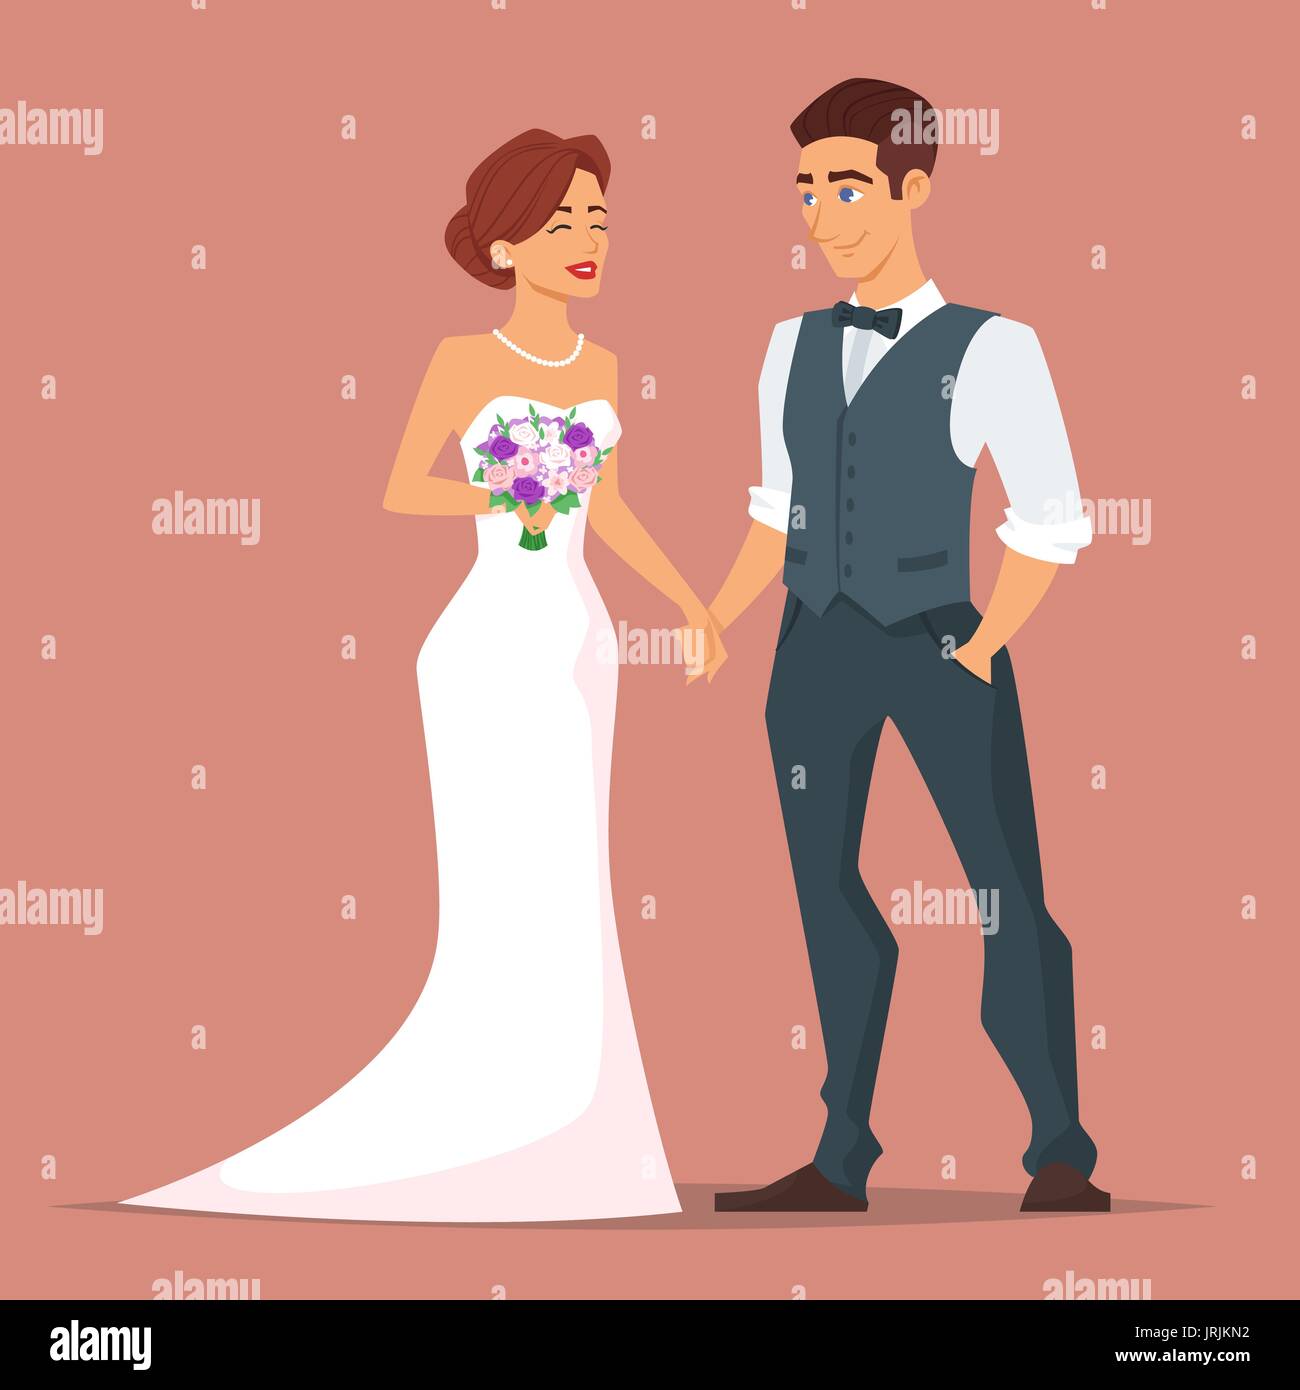 11,800+ Just Married Stock Illustrations, Royalty-Free Vector